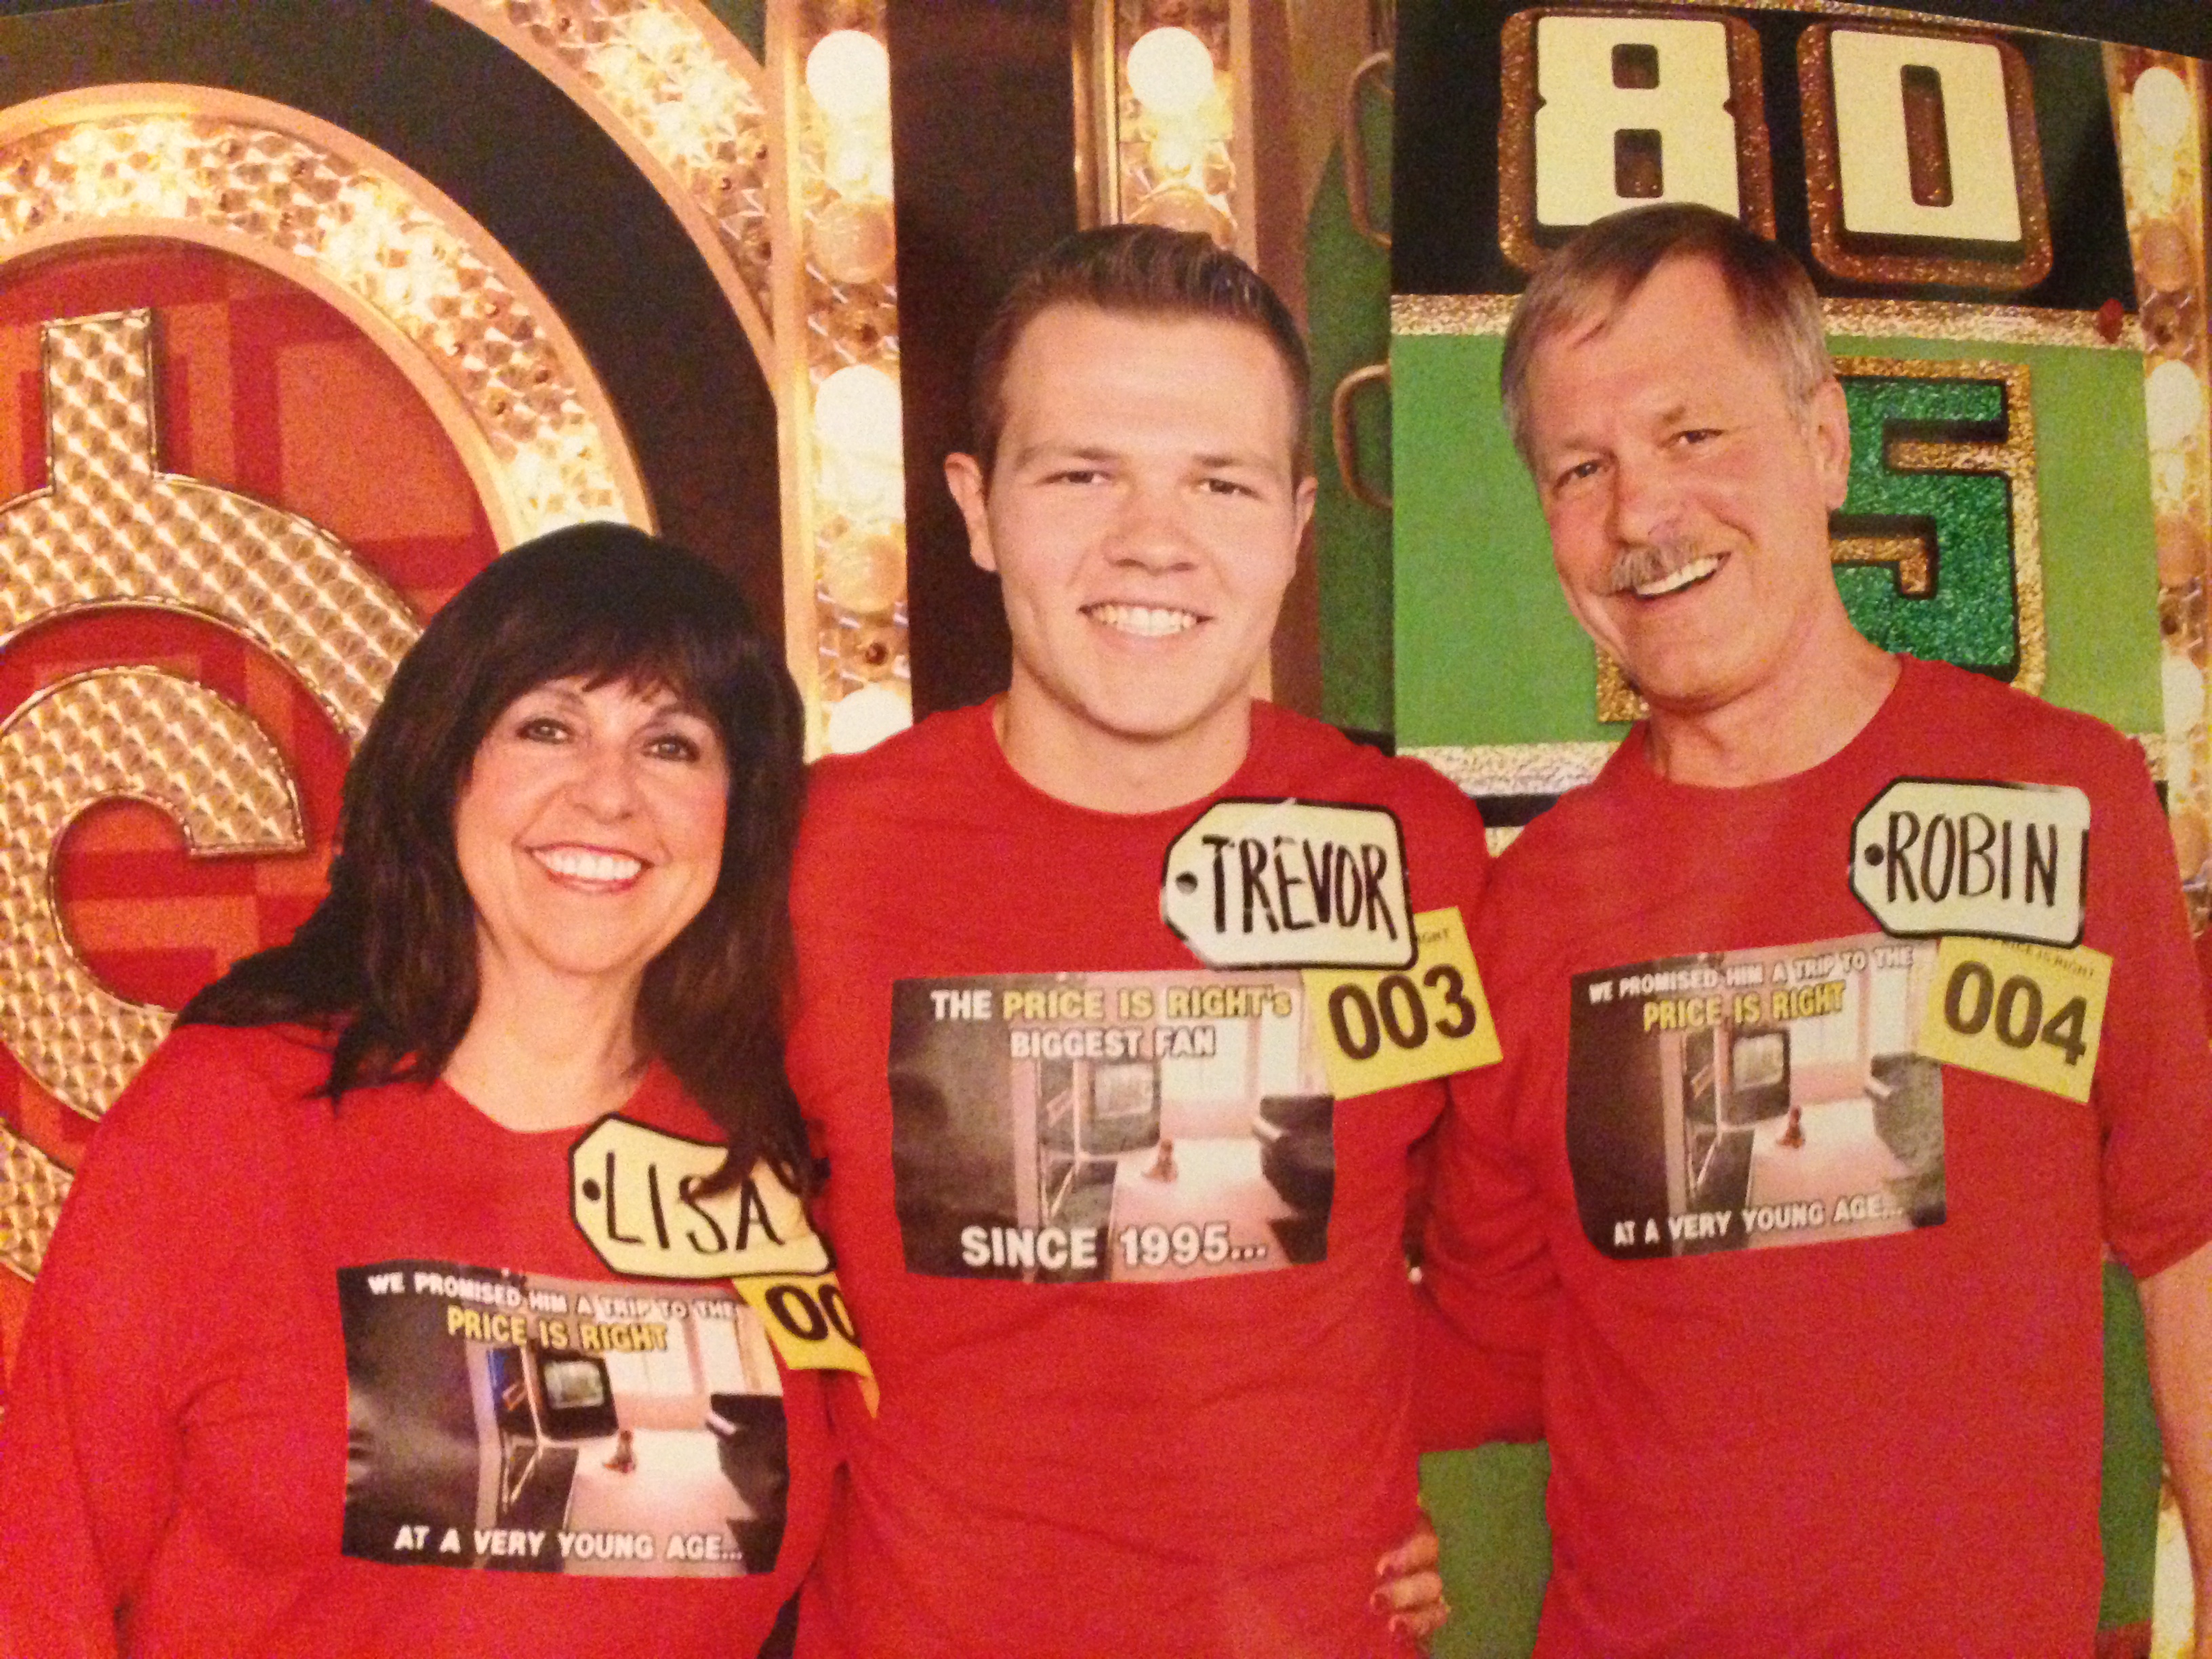 Lisa and Robin Peters kept their promise to their son, Trevor (center) that they made when he was a child. Trevor Peters became a contestant on “The Price is Right” after watching since 1995. (Submitted photo)